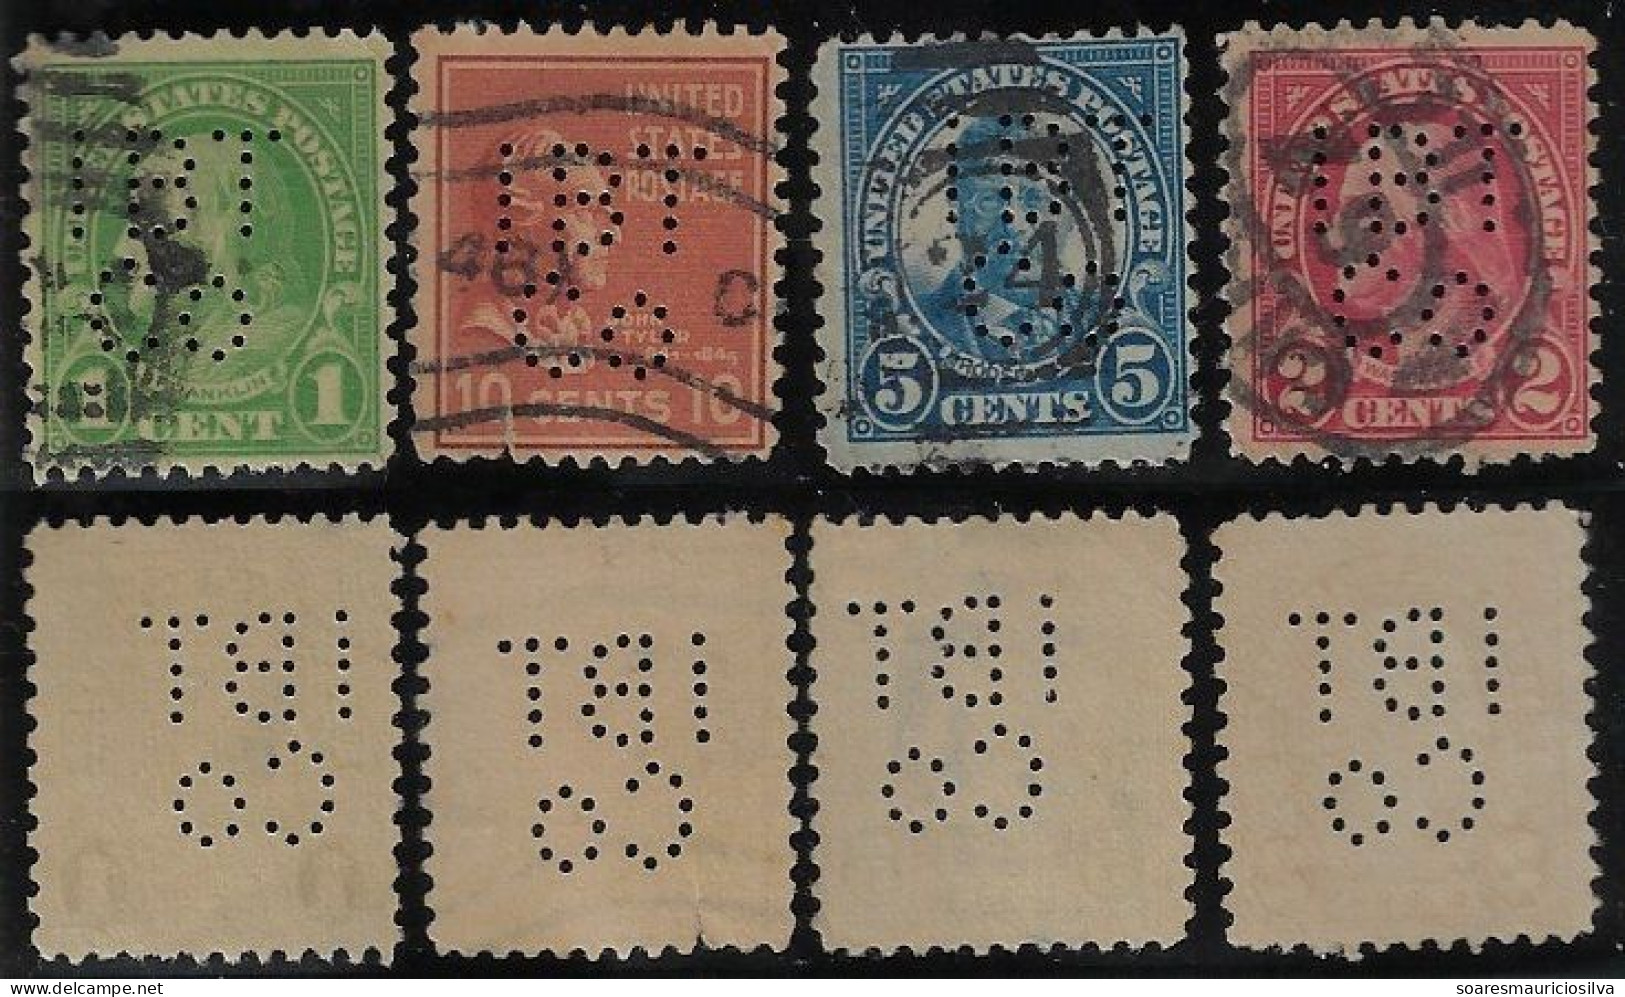 USA United States 1917/1960 4 Stamp Perfin IBT/Co By Illinois Bell Telephone Company From Chicago Lochung Perfore - Perfin